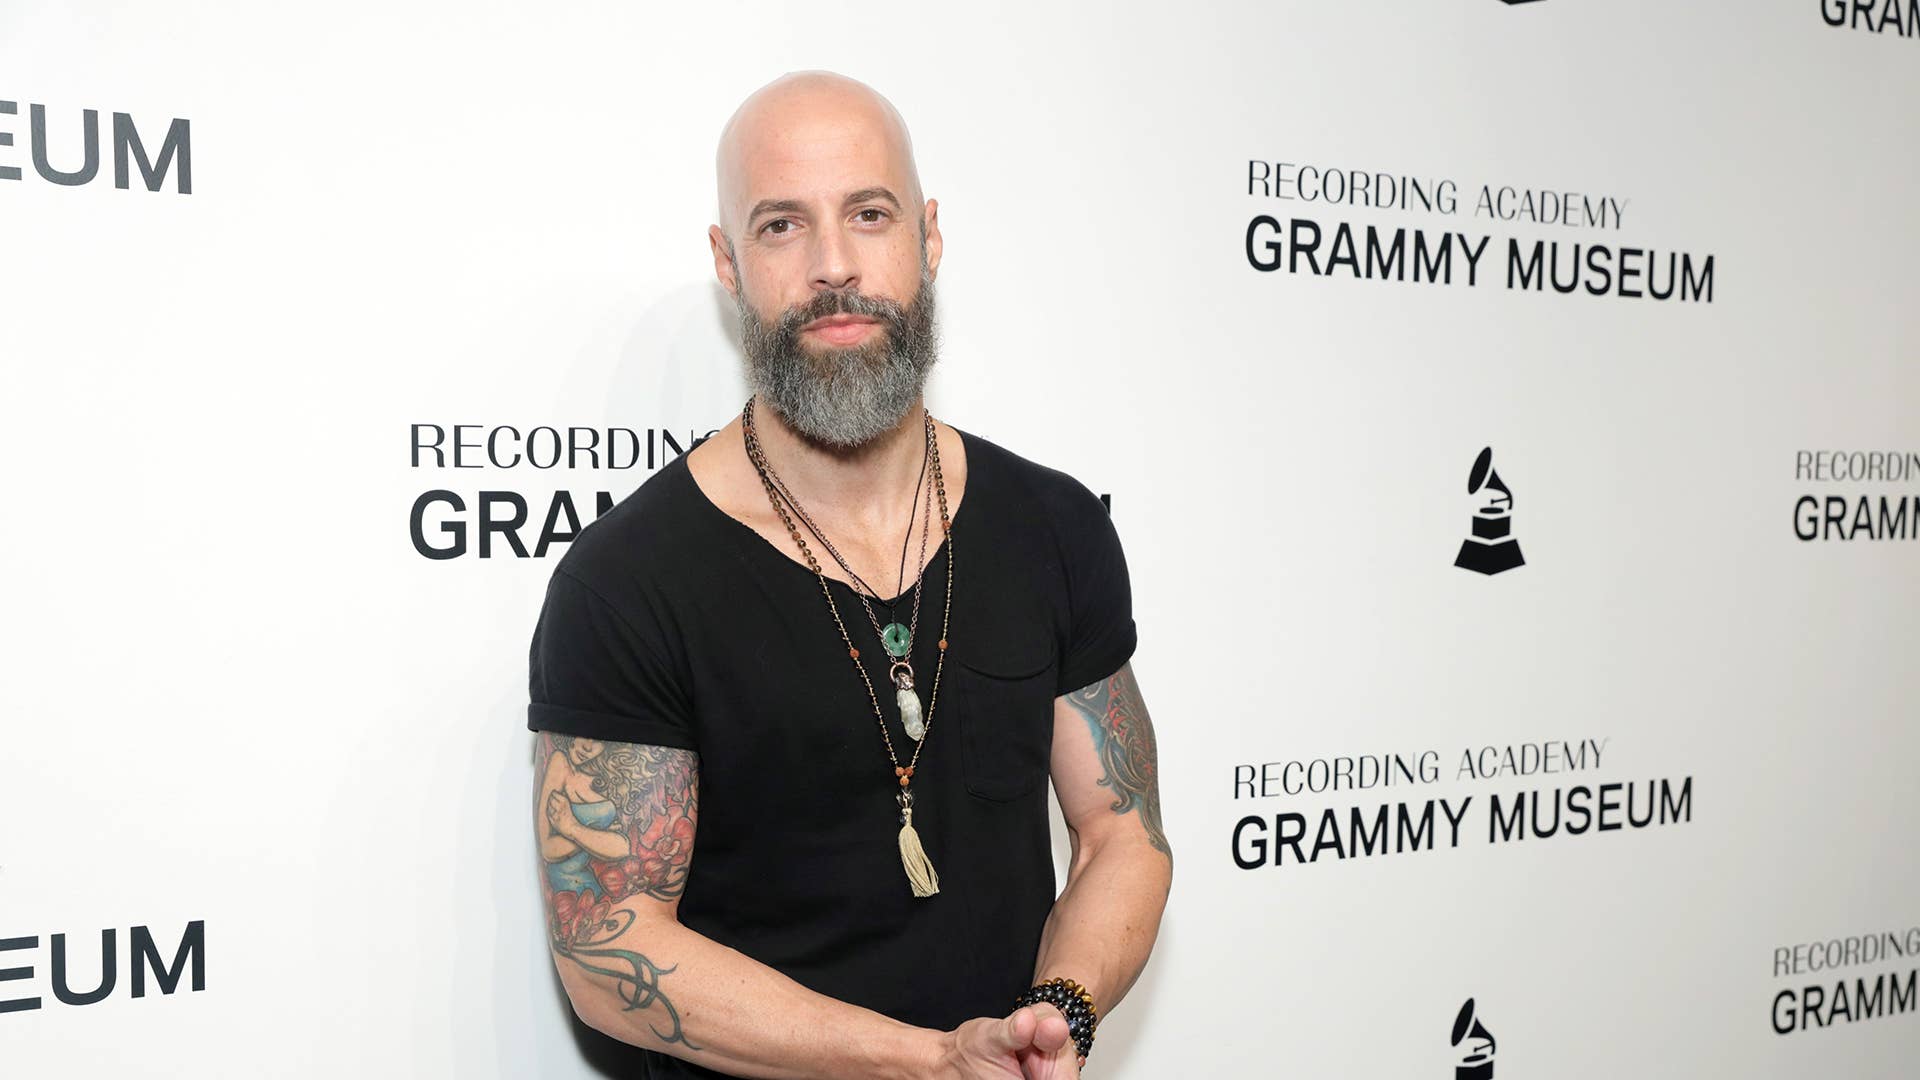 Chris Daughtry attends The Drop: Daughtry at The GRAMMY Museum on September 14, 2021 in Los Angeles, California